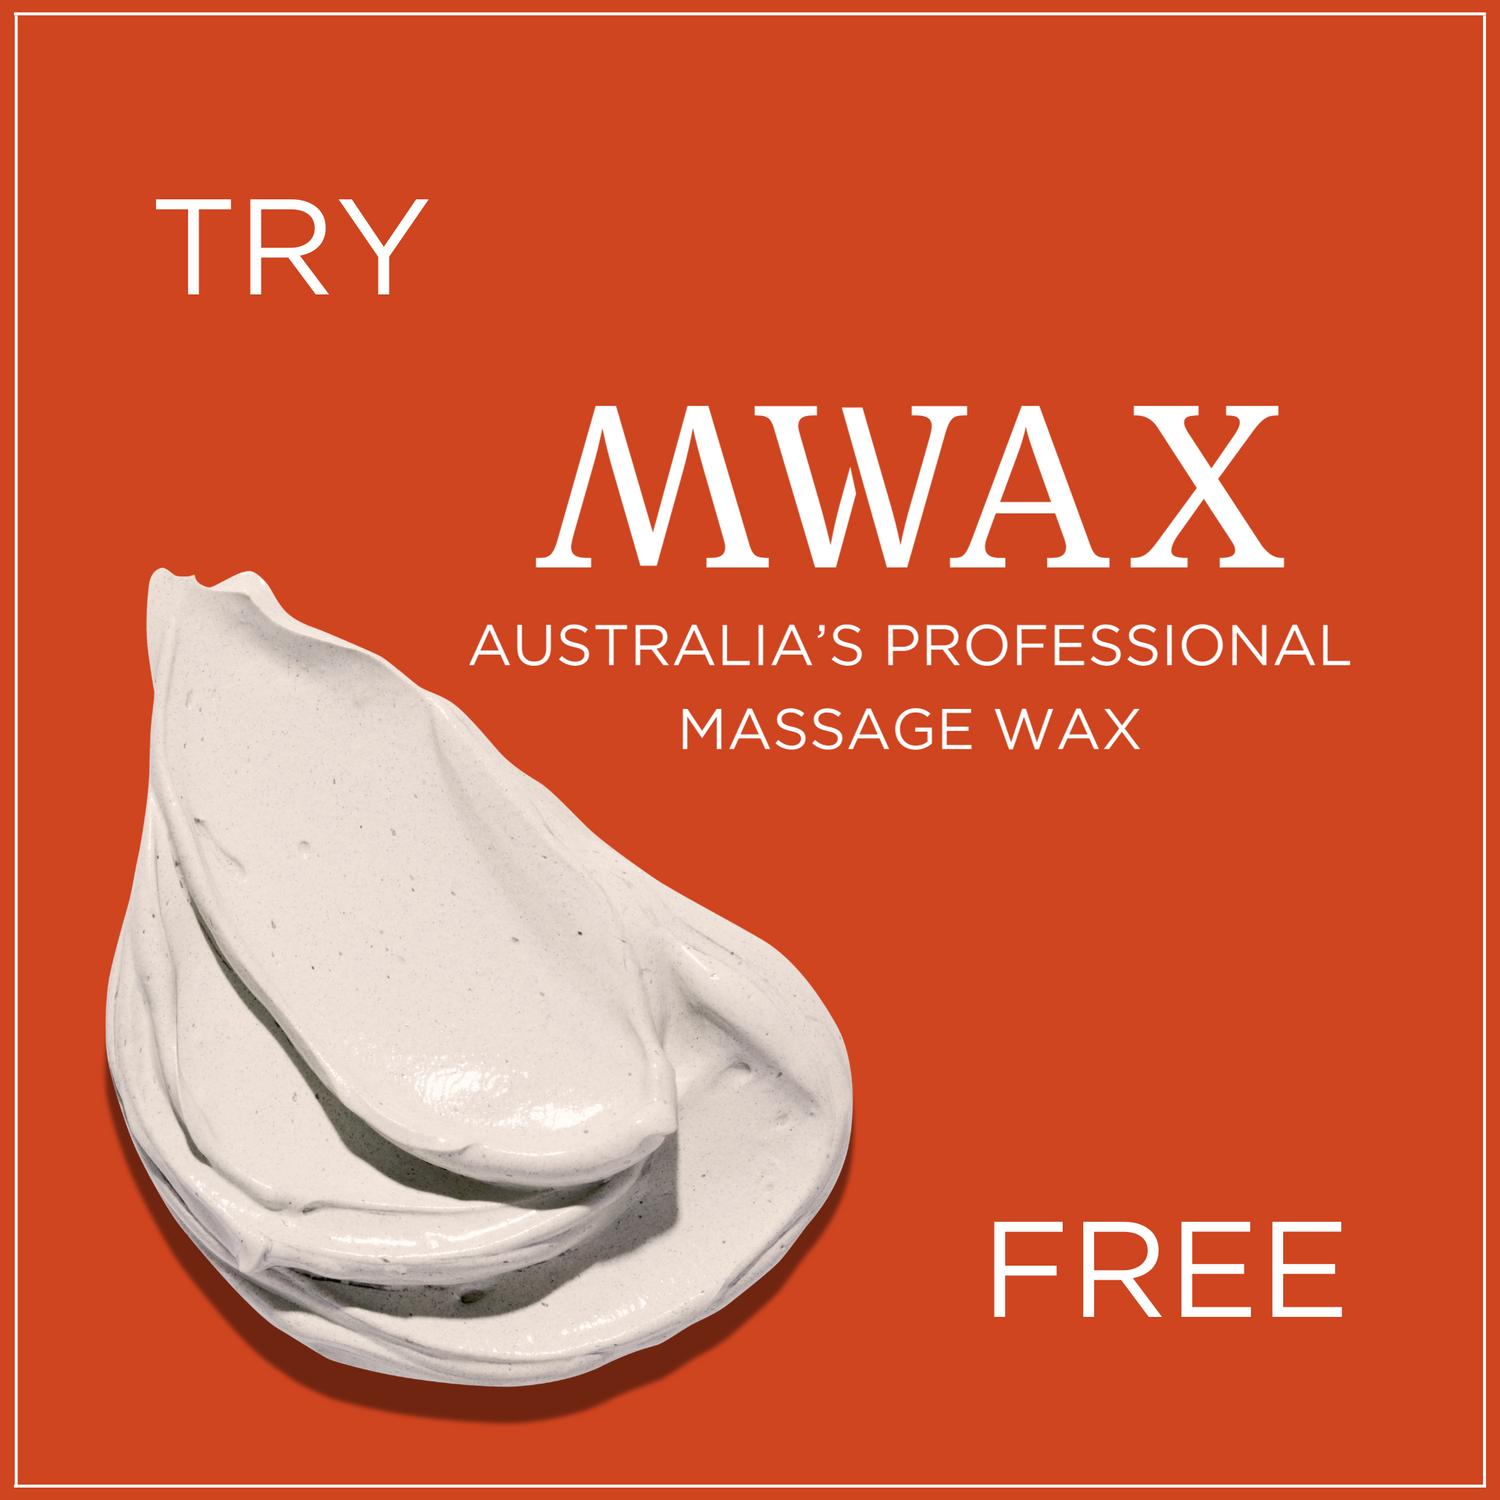 Mwax is the best massage wax on the market free sample for students